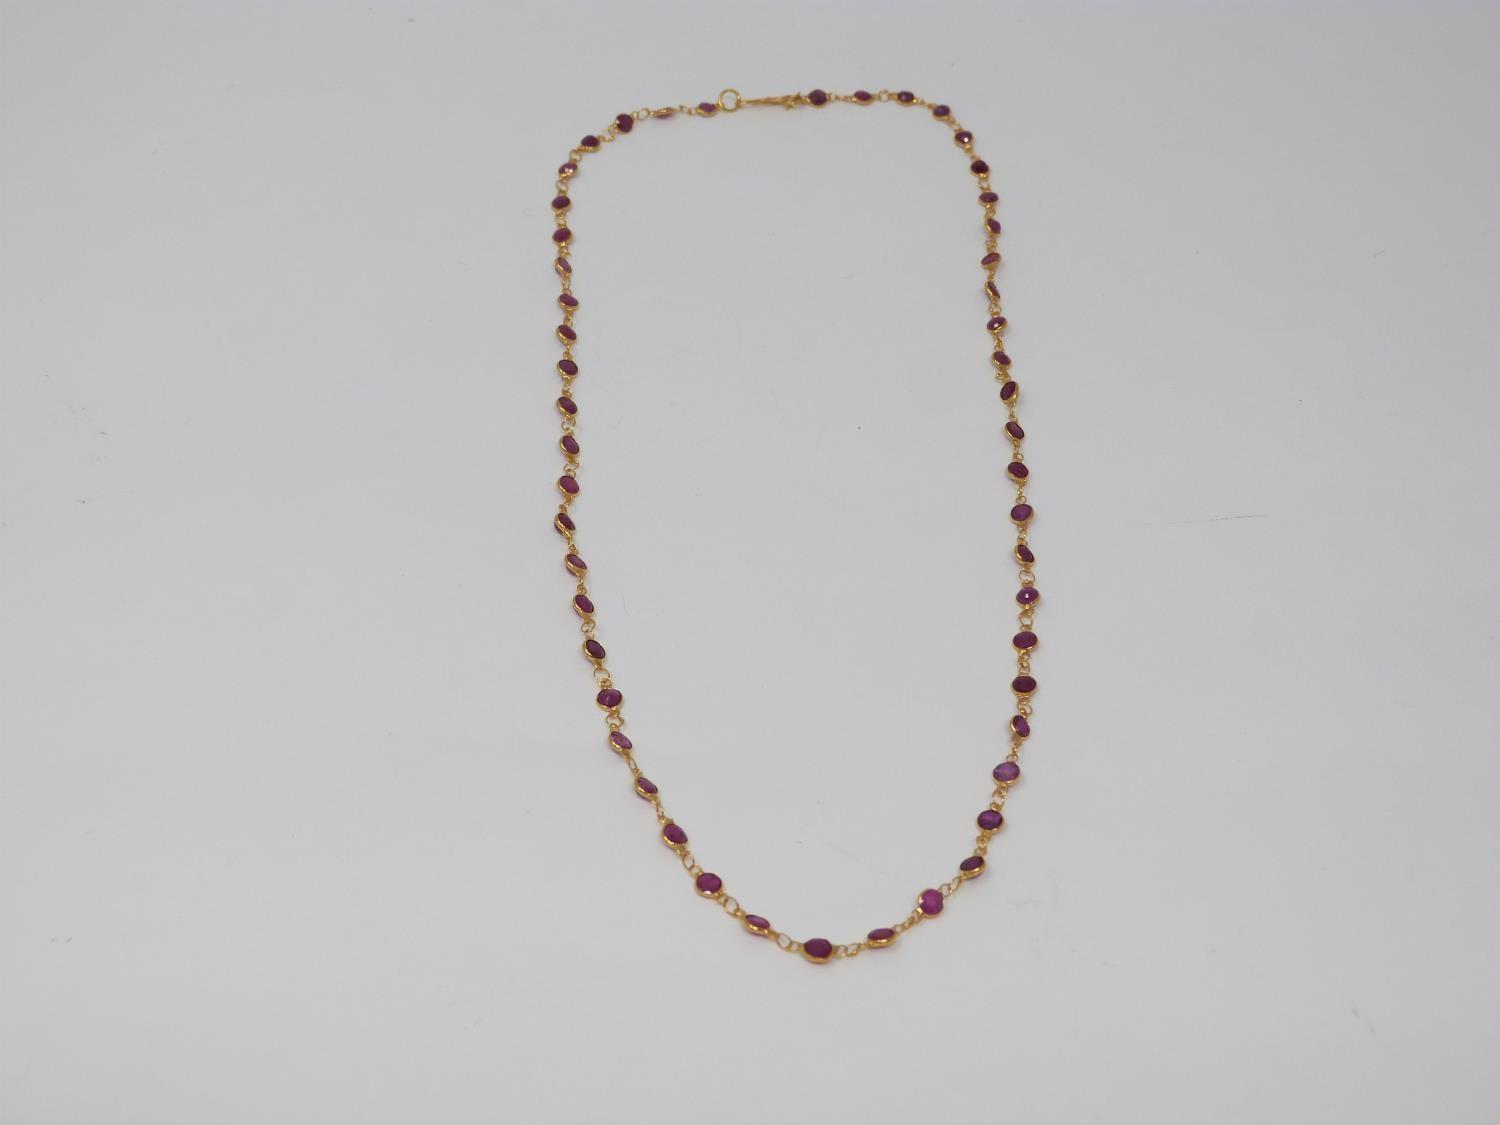 A bespoke yellow metal (tested 14 carat yellow gold) and ruby chain necklace. Set with fifty one